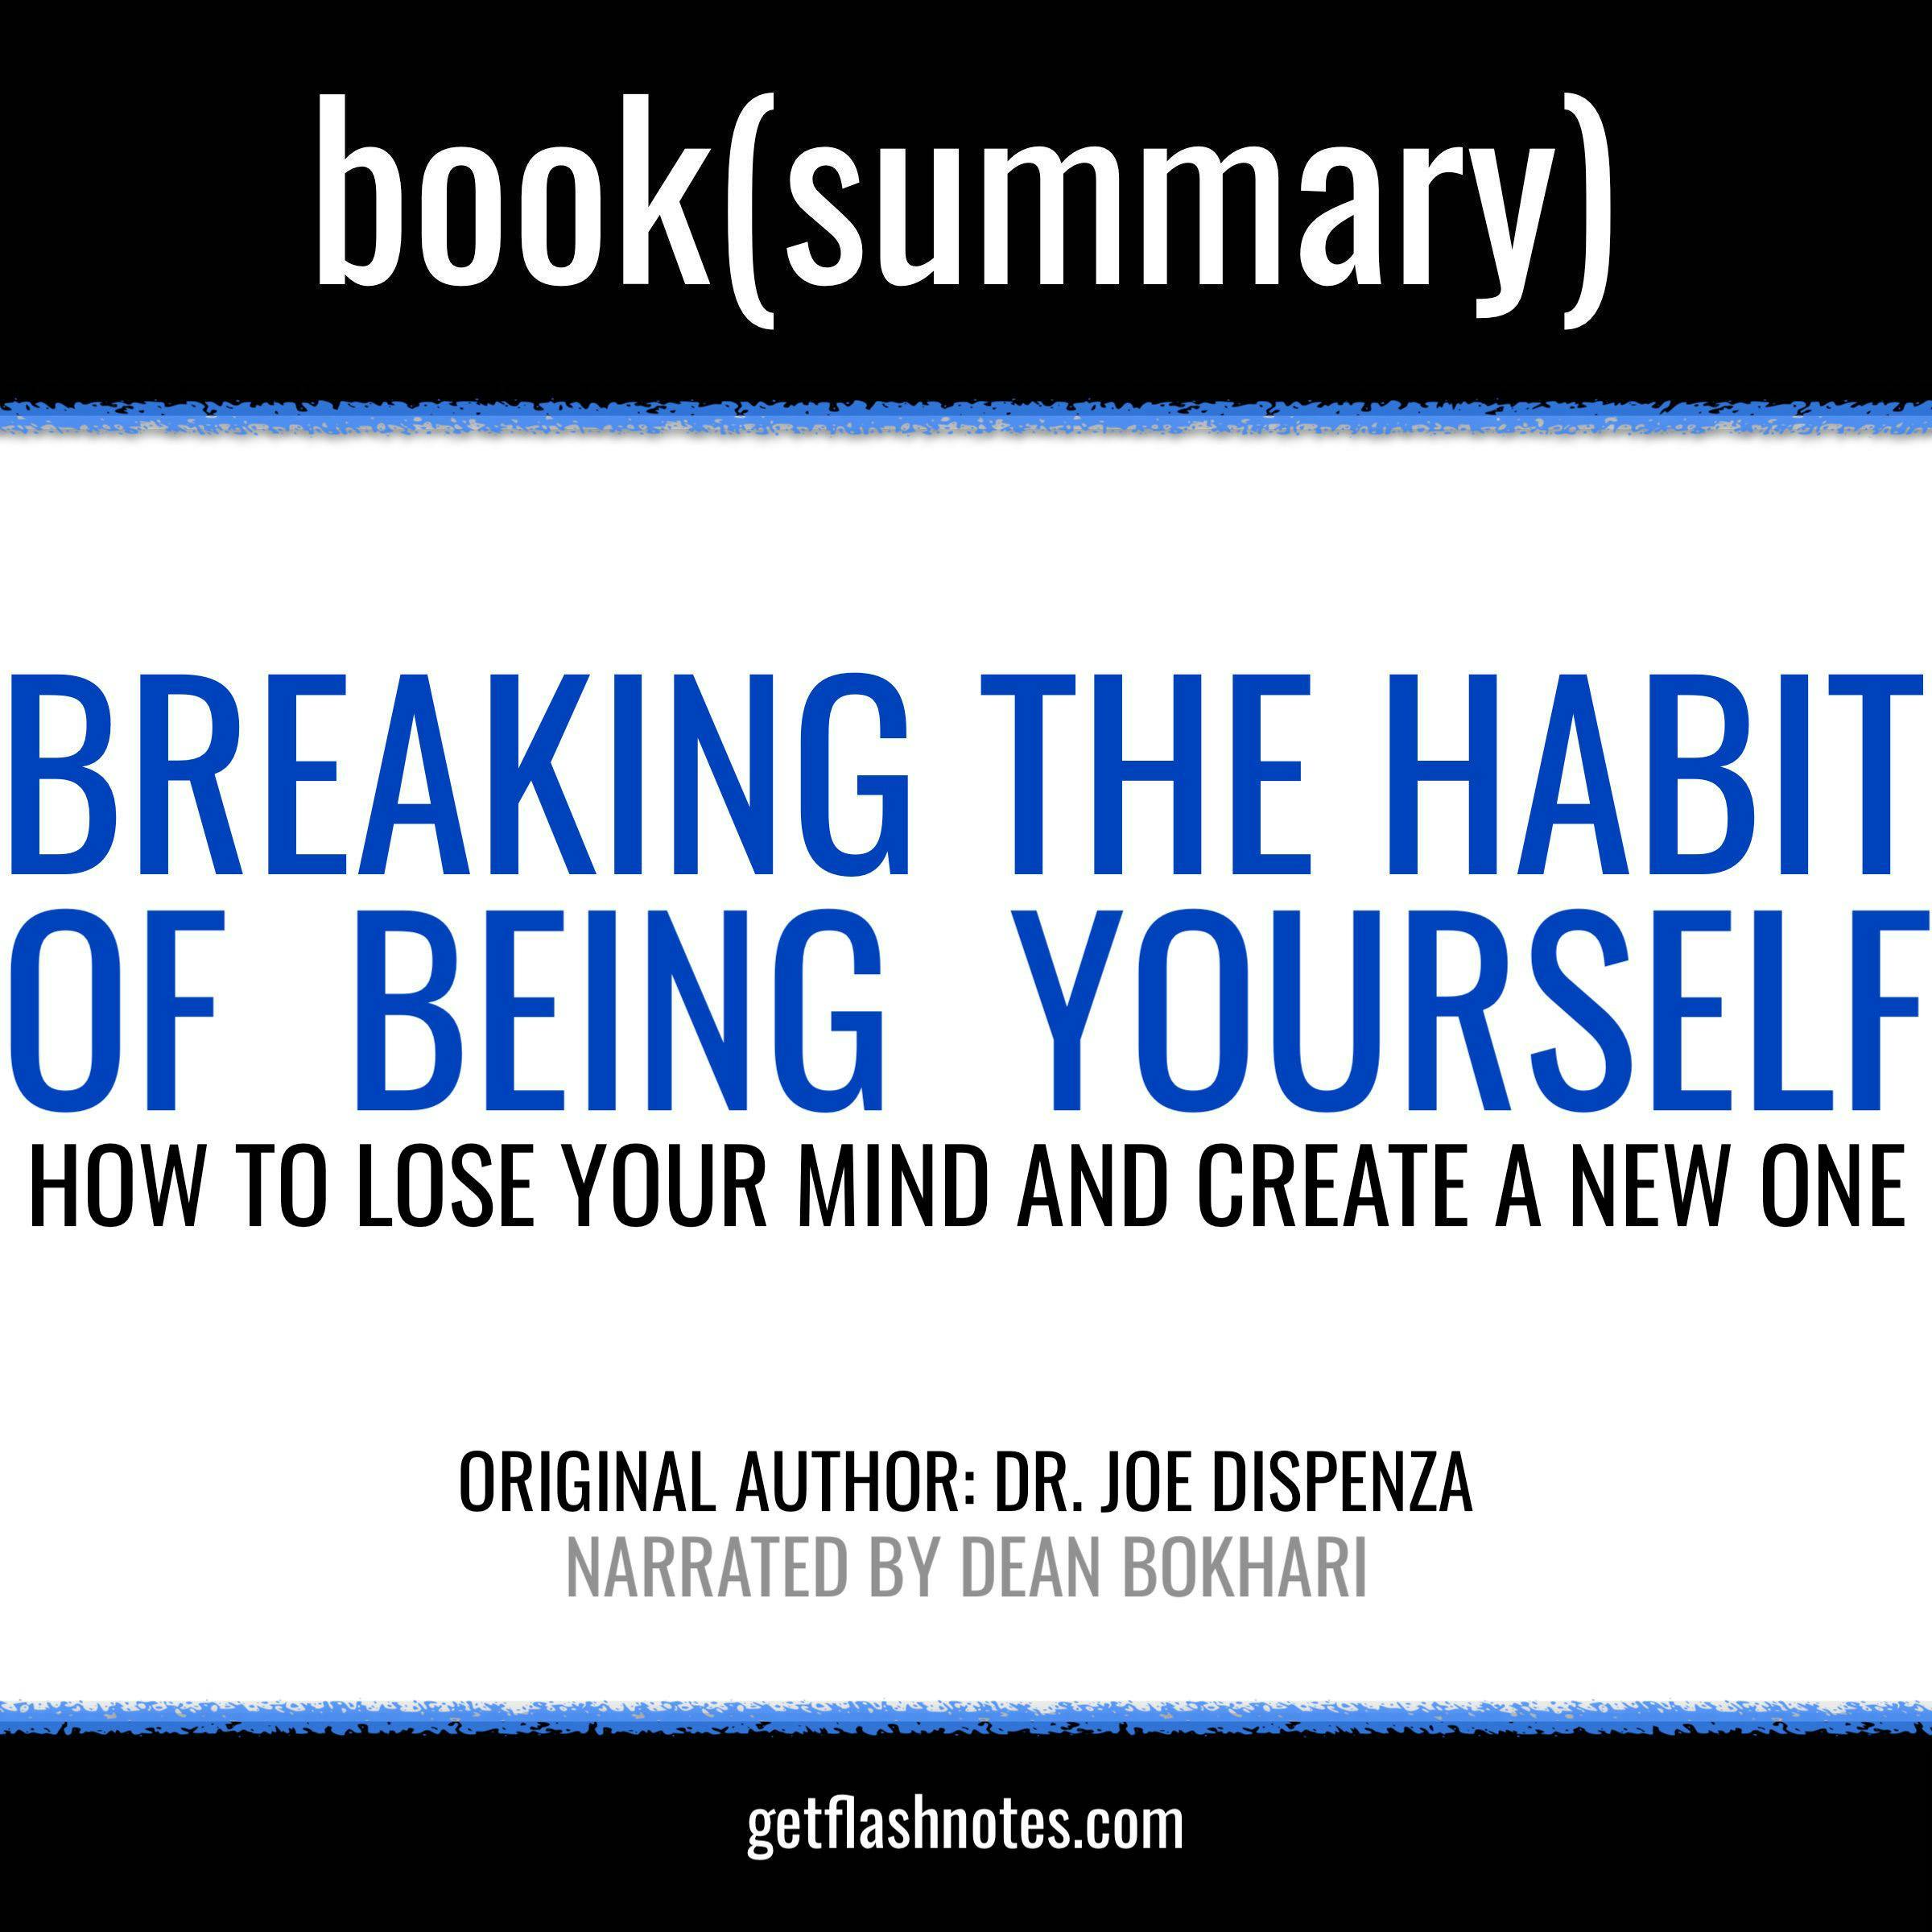 Breaking the Habit of Being Yourself by Joe Dispenza - Book Summary: How to Lose Your Mind and Create a New One - undefined